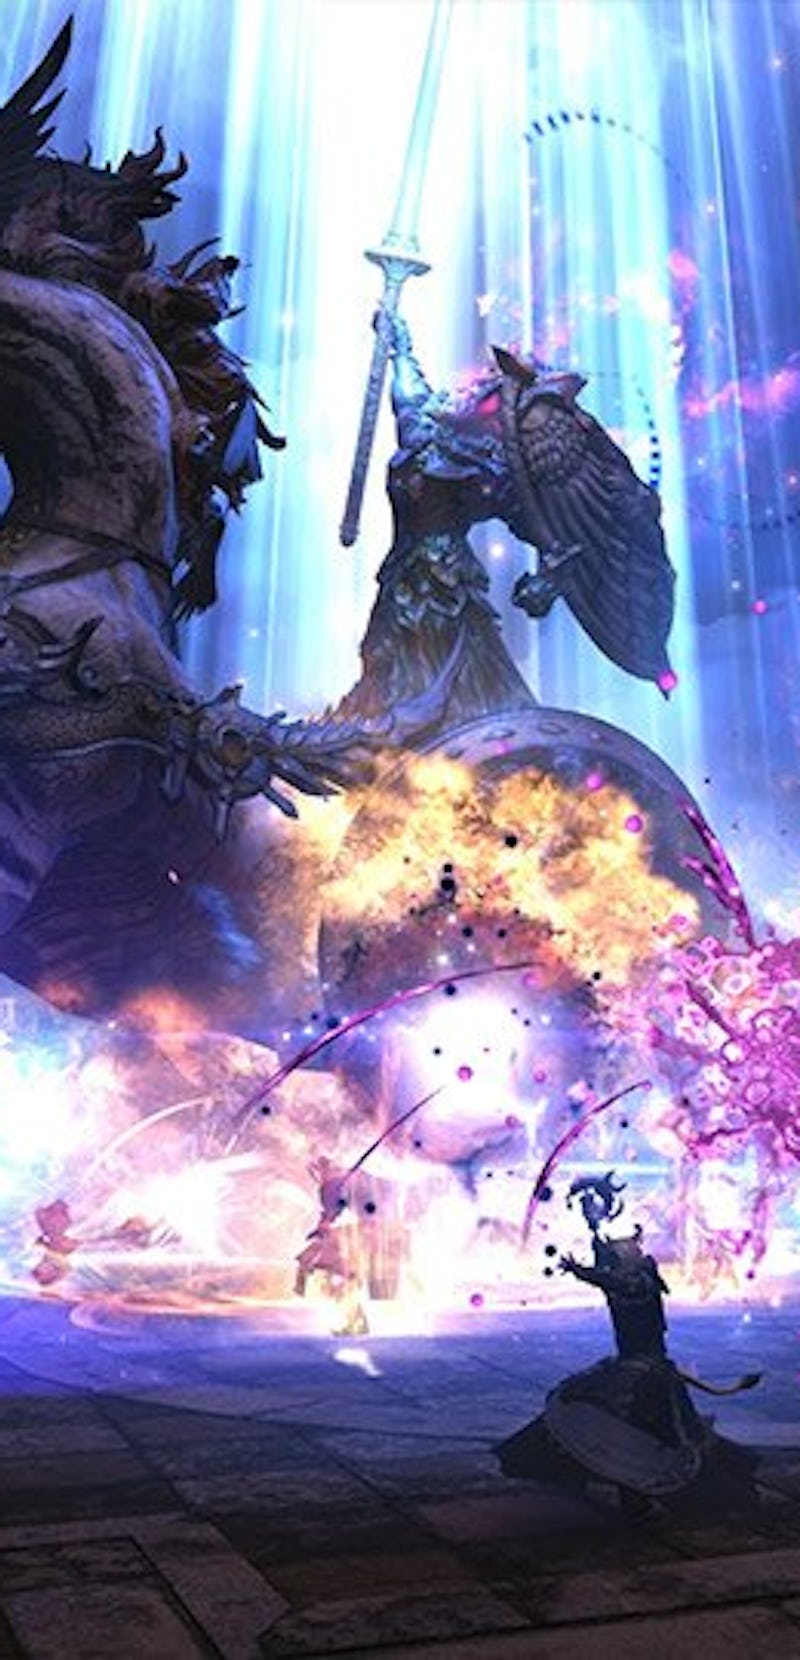 A player fighting a boss on chariot from Final Fantasy 14